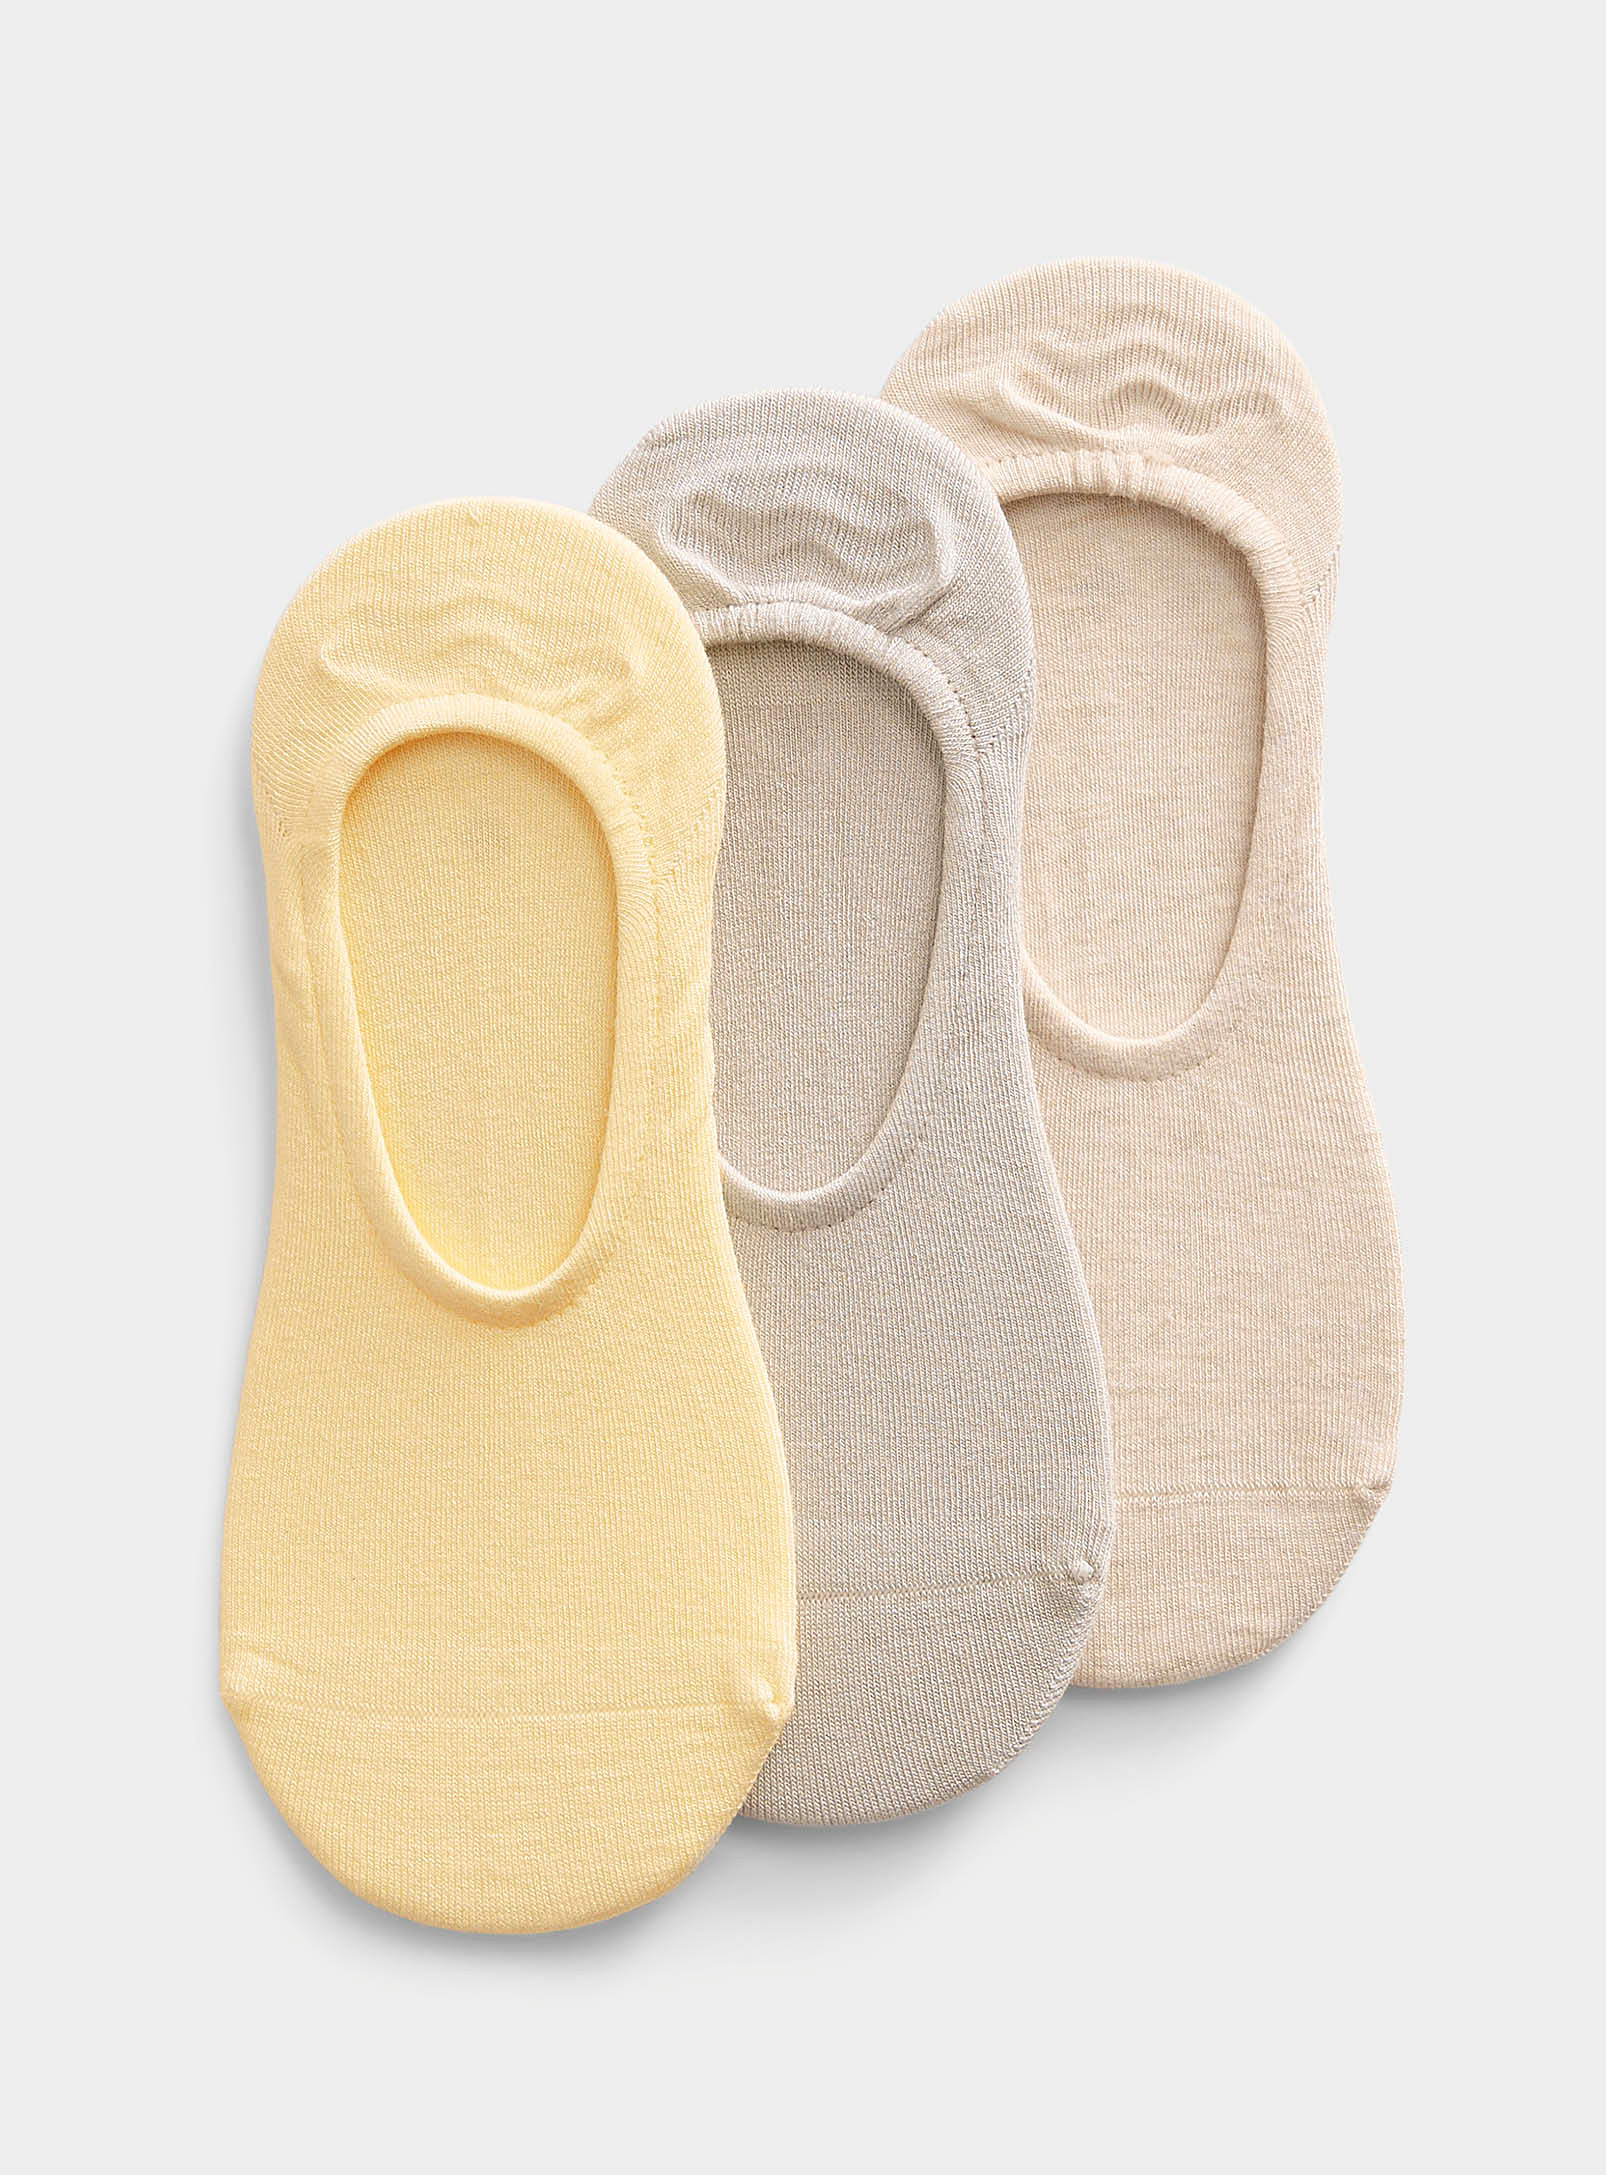 Lemon - Women's Silk-touch knit foot liners Set of 3 pairs